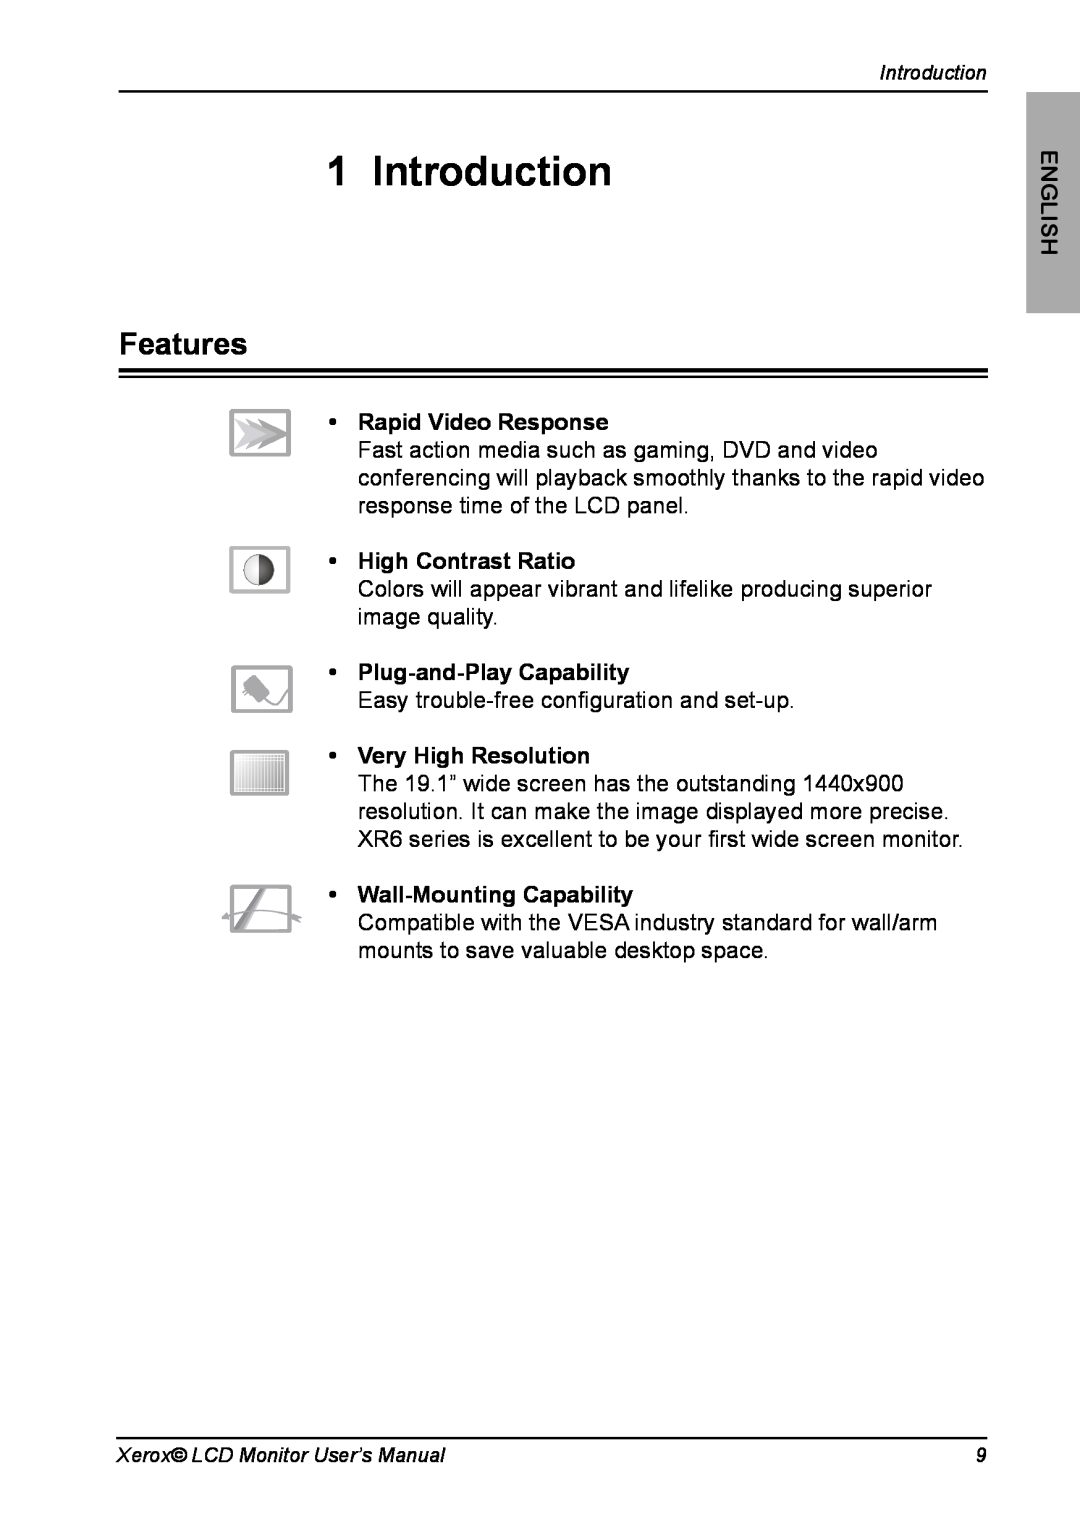 Xerox XR6 Series manual Introduction, Features, Rapid Video Response, High Contrast Ratio, Plug-and-PlayCapability, English 